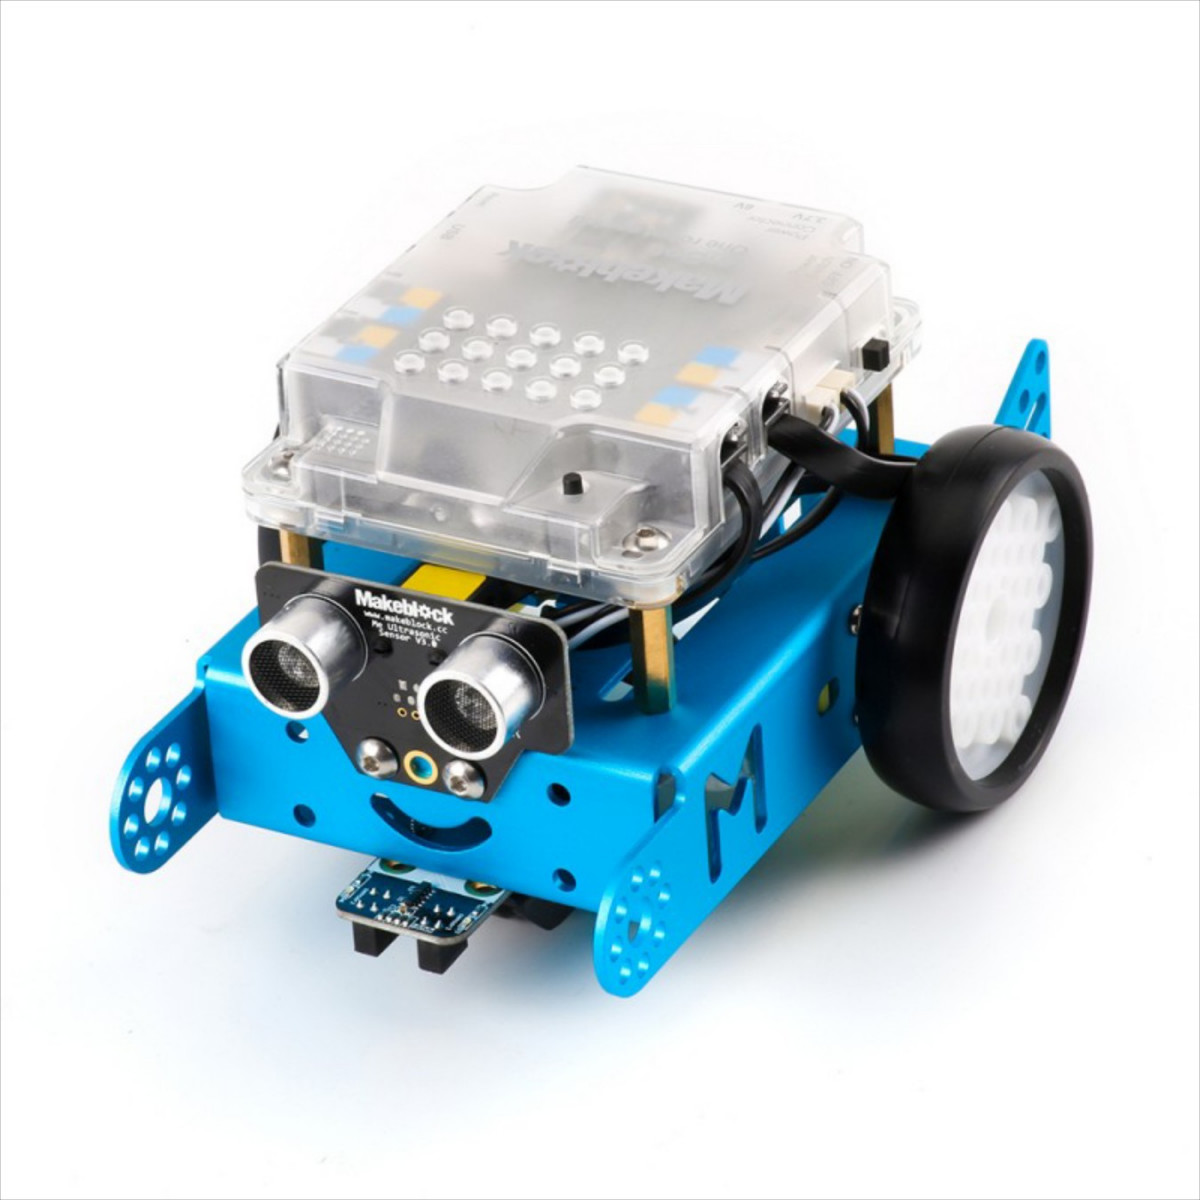 Entry-Level Robot Gift for Kids: mBot - Ages: 8+